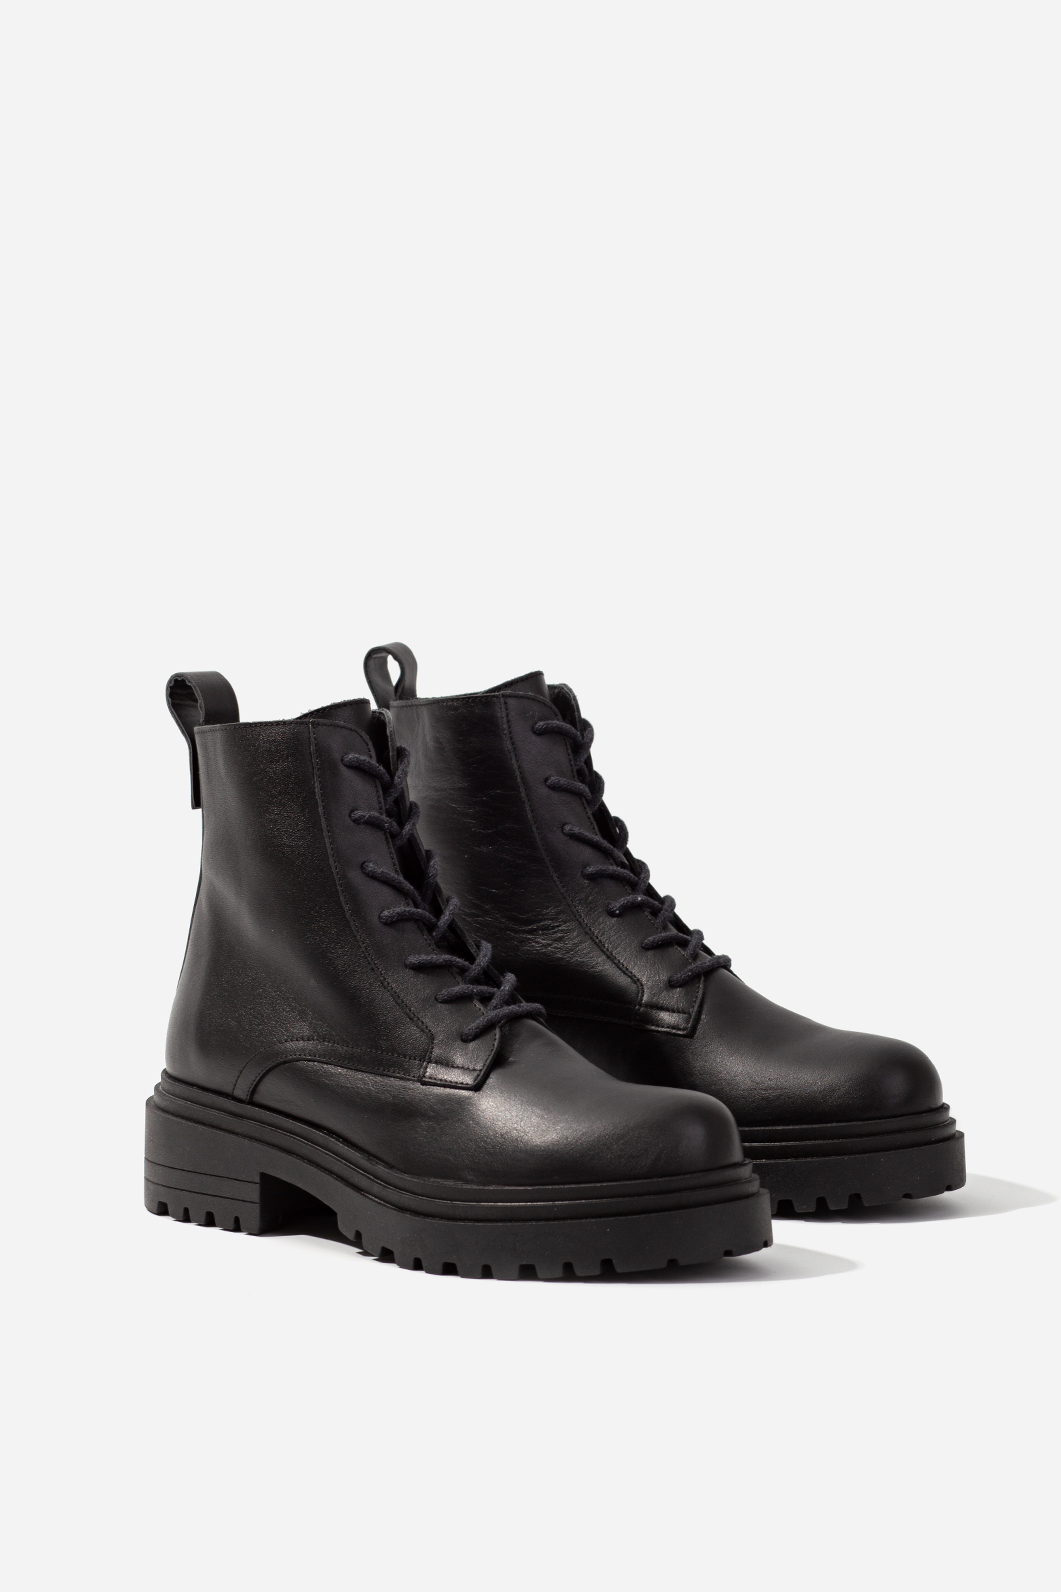 Riri black leather boots with wool